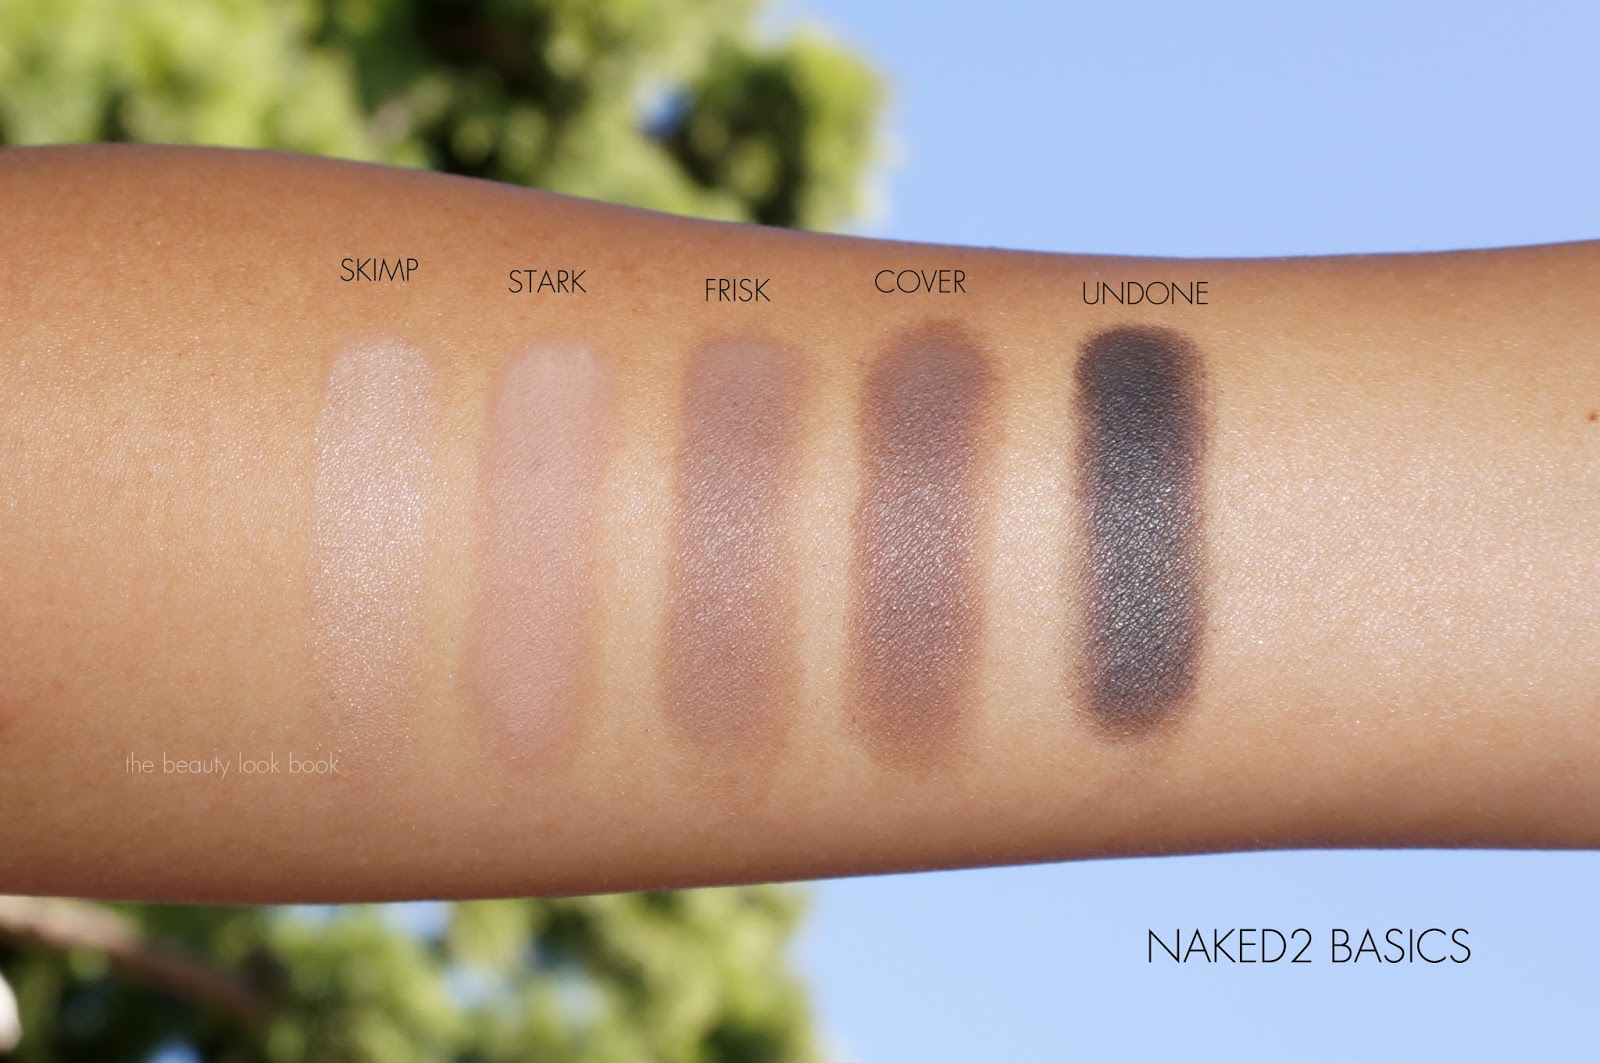 If you’re the type who prefers to pick out individual shades, Urban Decay h...